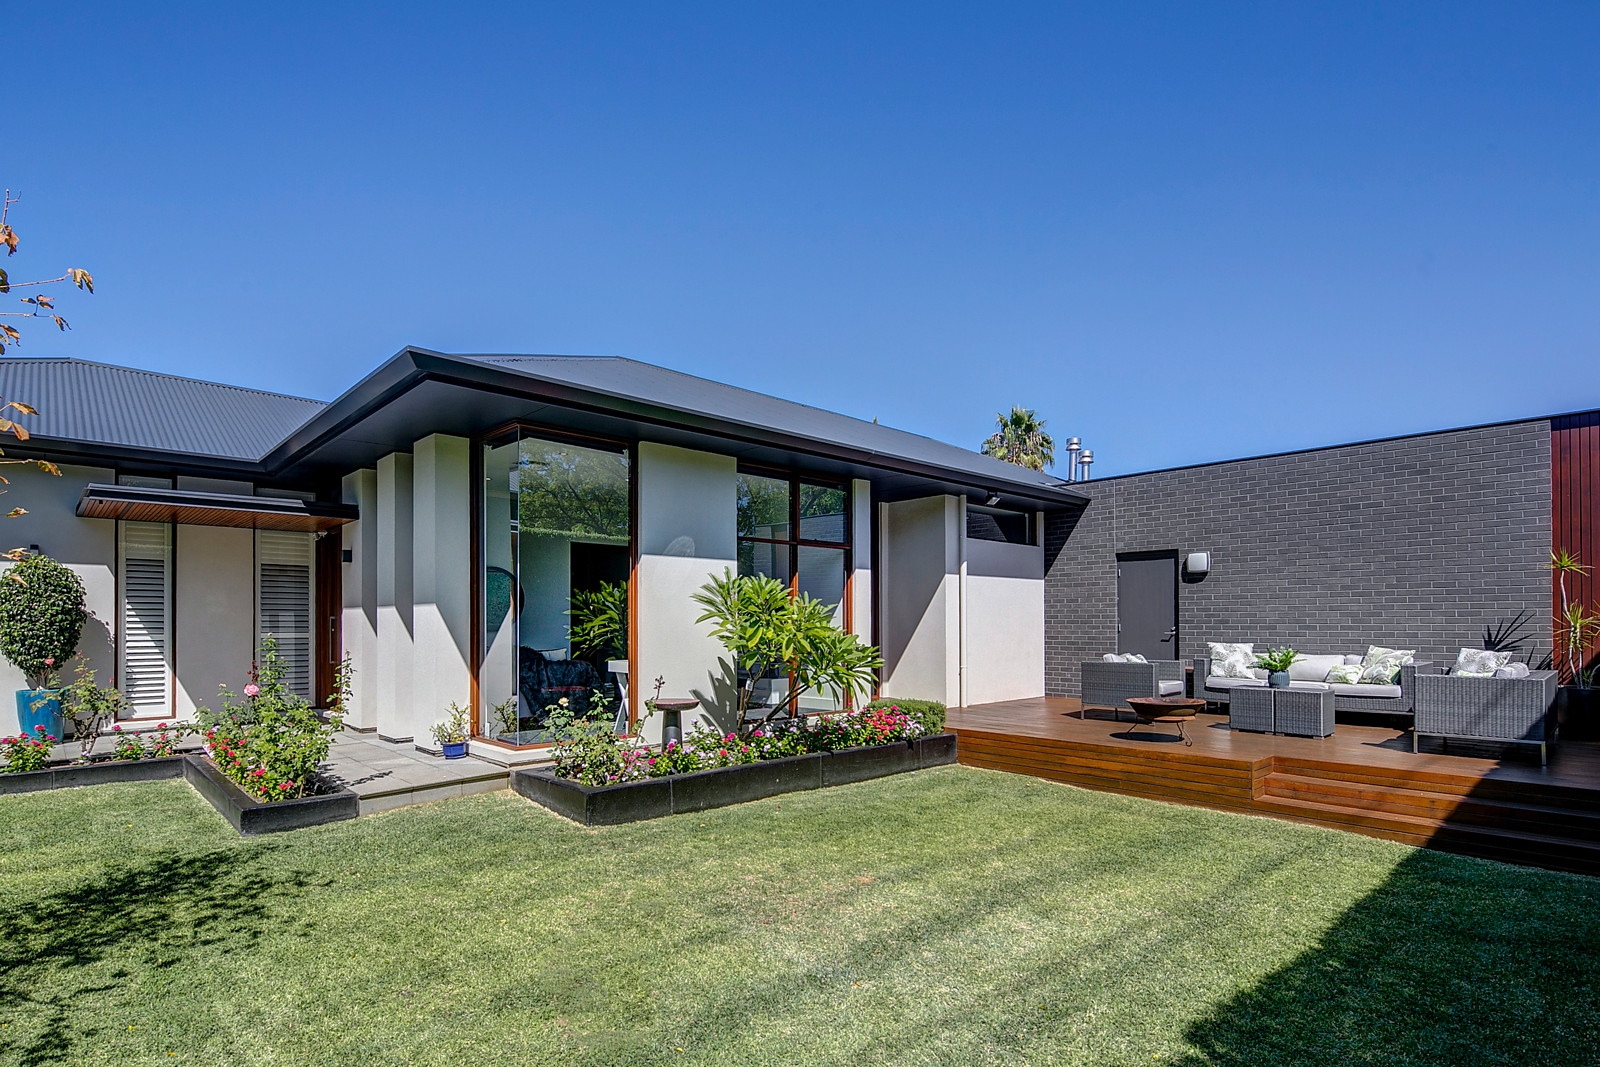 21 Sturt Avenue, Toorak Gardens Sold by Booth Real Estate - image 1